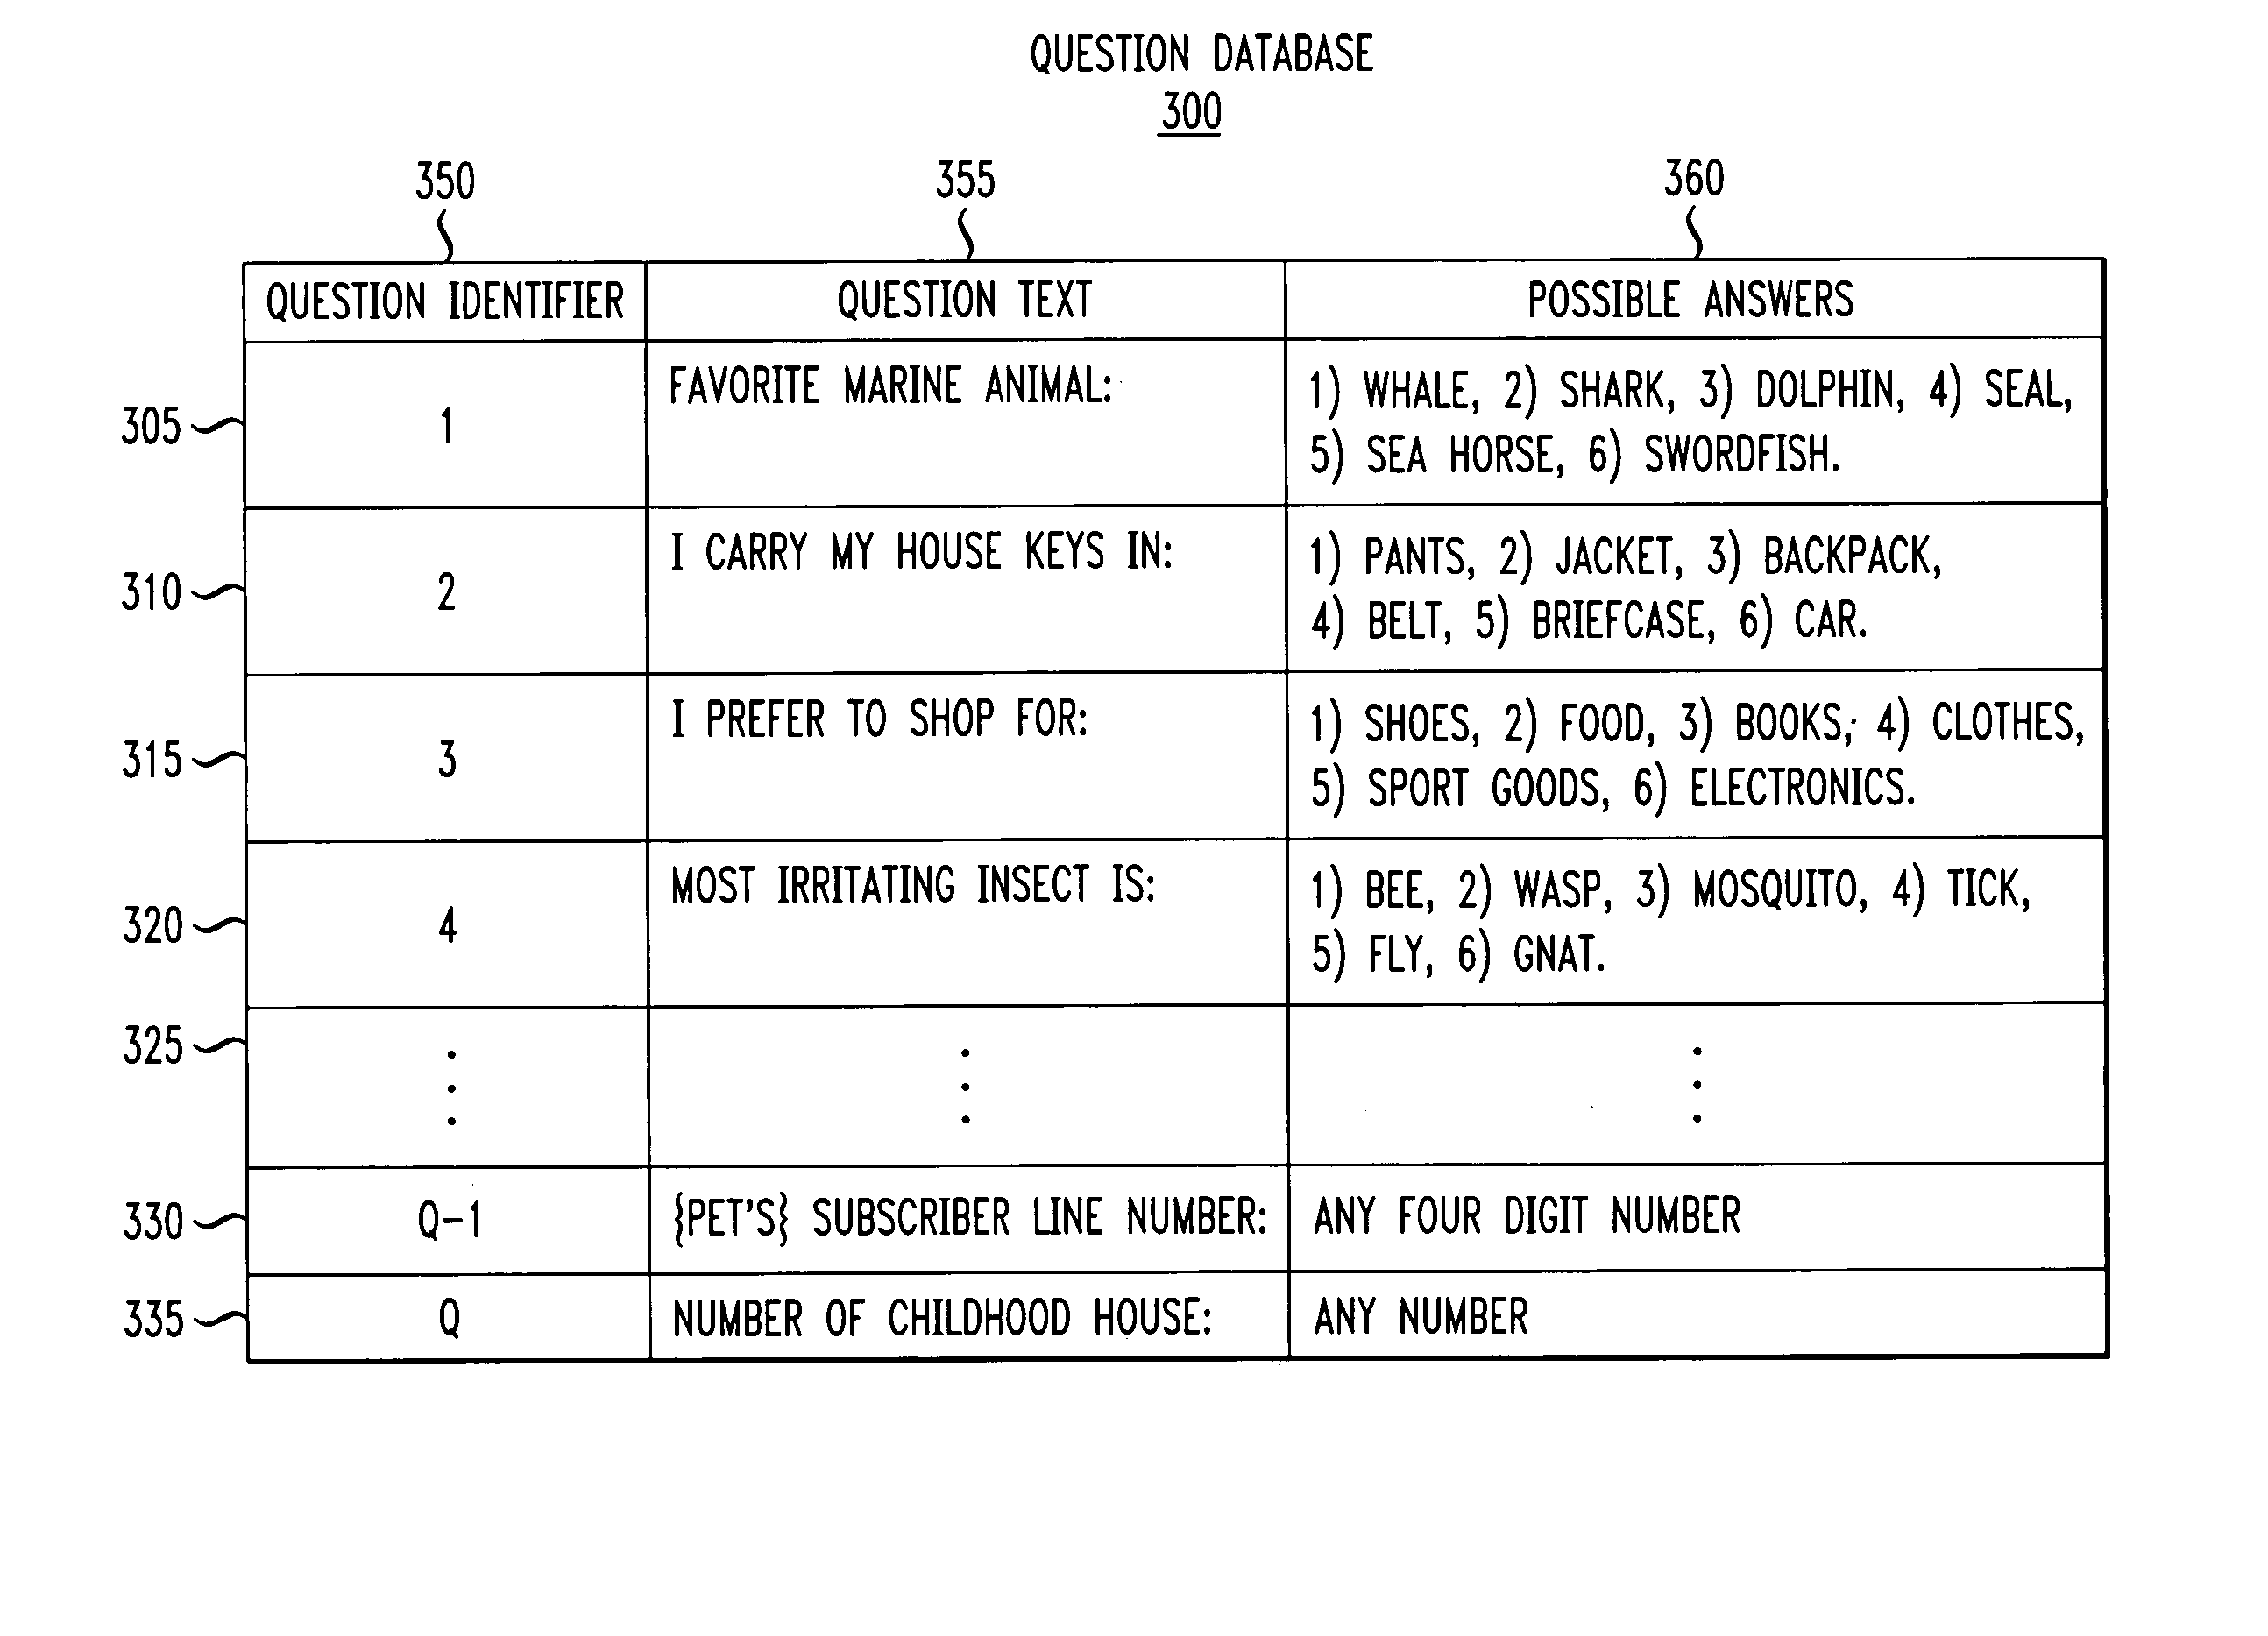 Method and apparatus for authenticating a user using query directed passwords